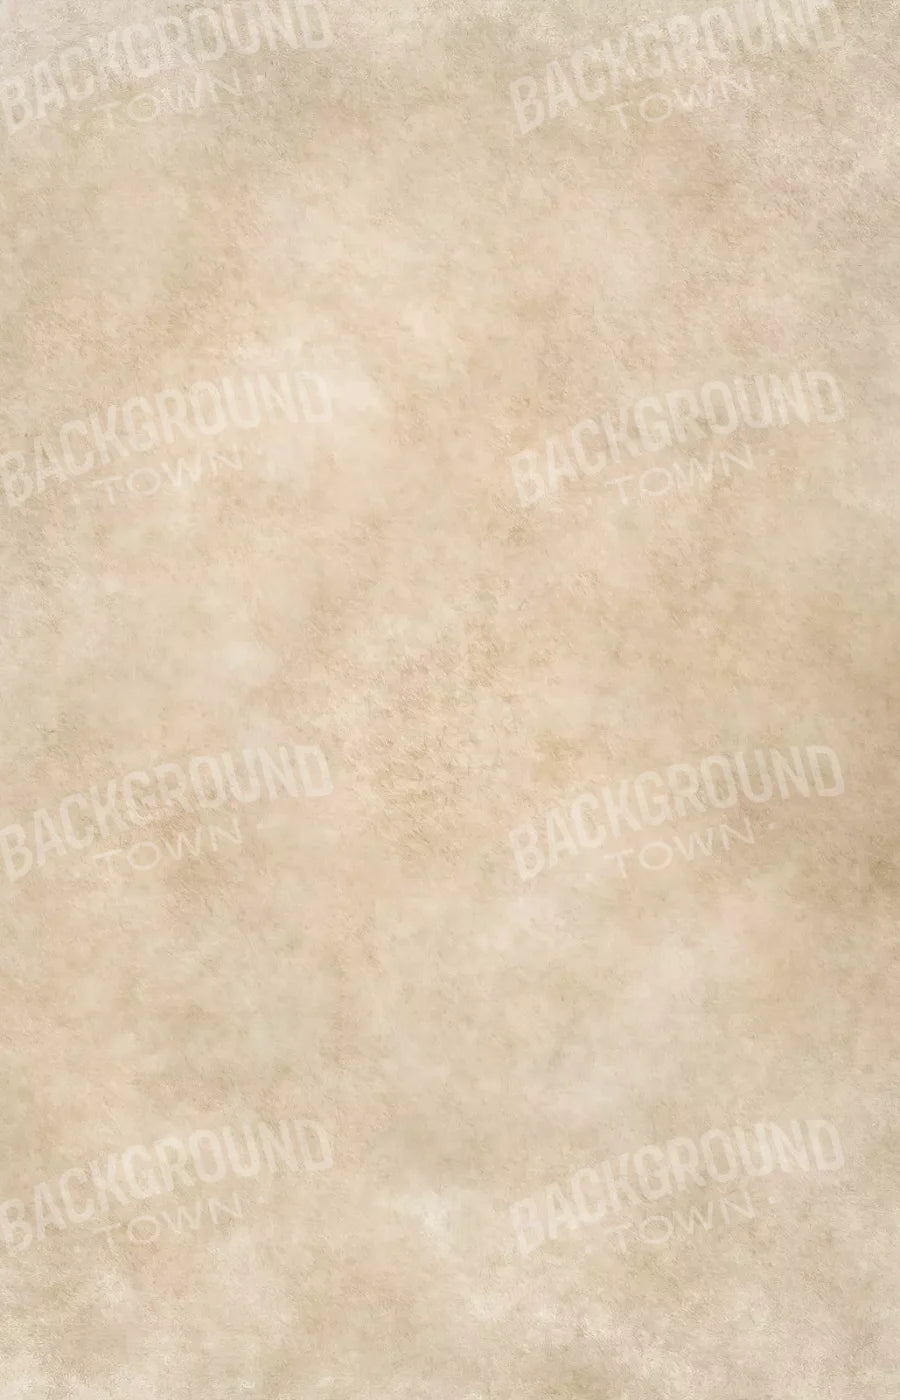 Spring Sand 8X12 Ultracloth ( 96 X 144 Inch ) Backdrop